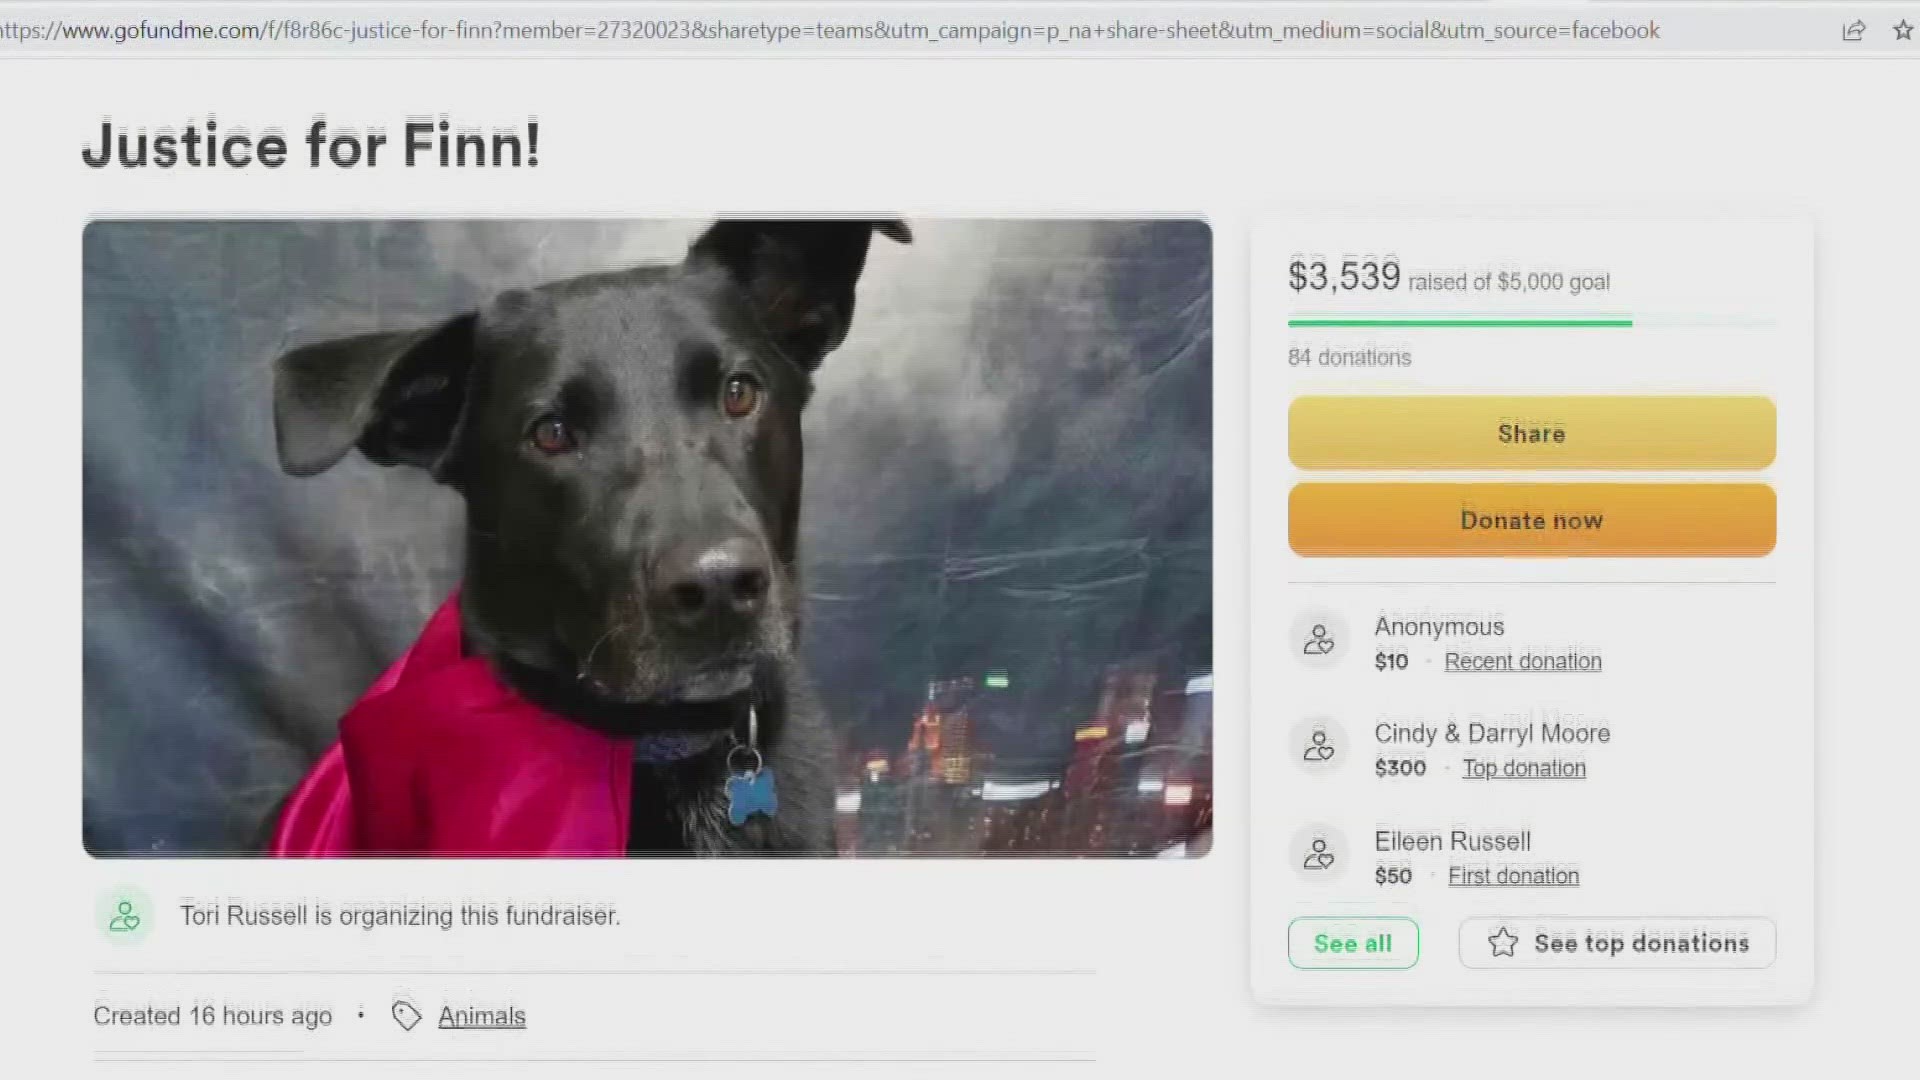 According to a GoFundMe, a friend of the dog's owners started a fundraiser to help them hire a lawyer.